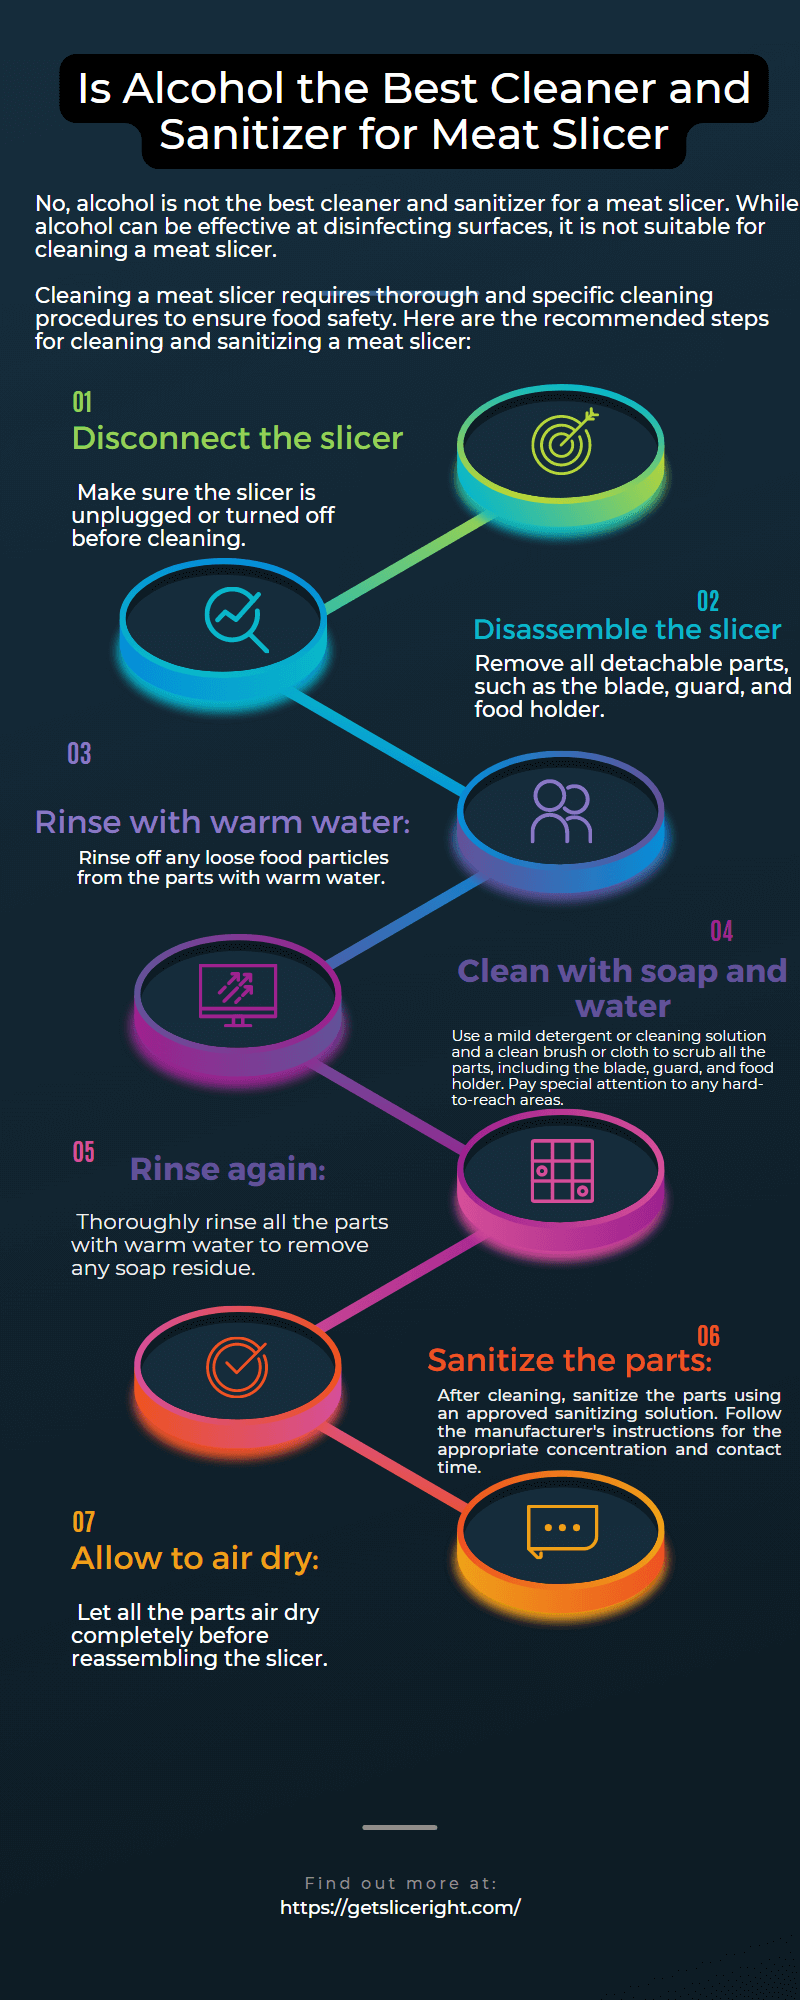 Is Alcohol the Best Cleaner and Sanitizer for Meat Slicer - Getsliceright Infographic